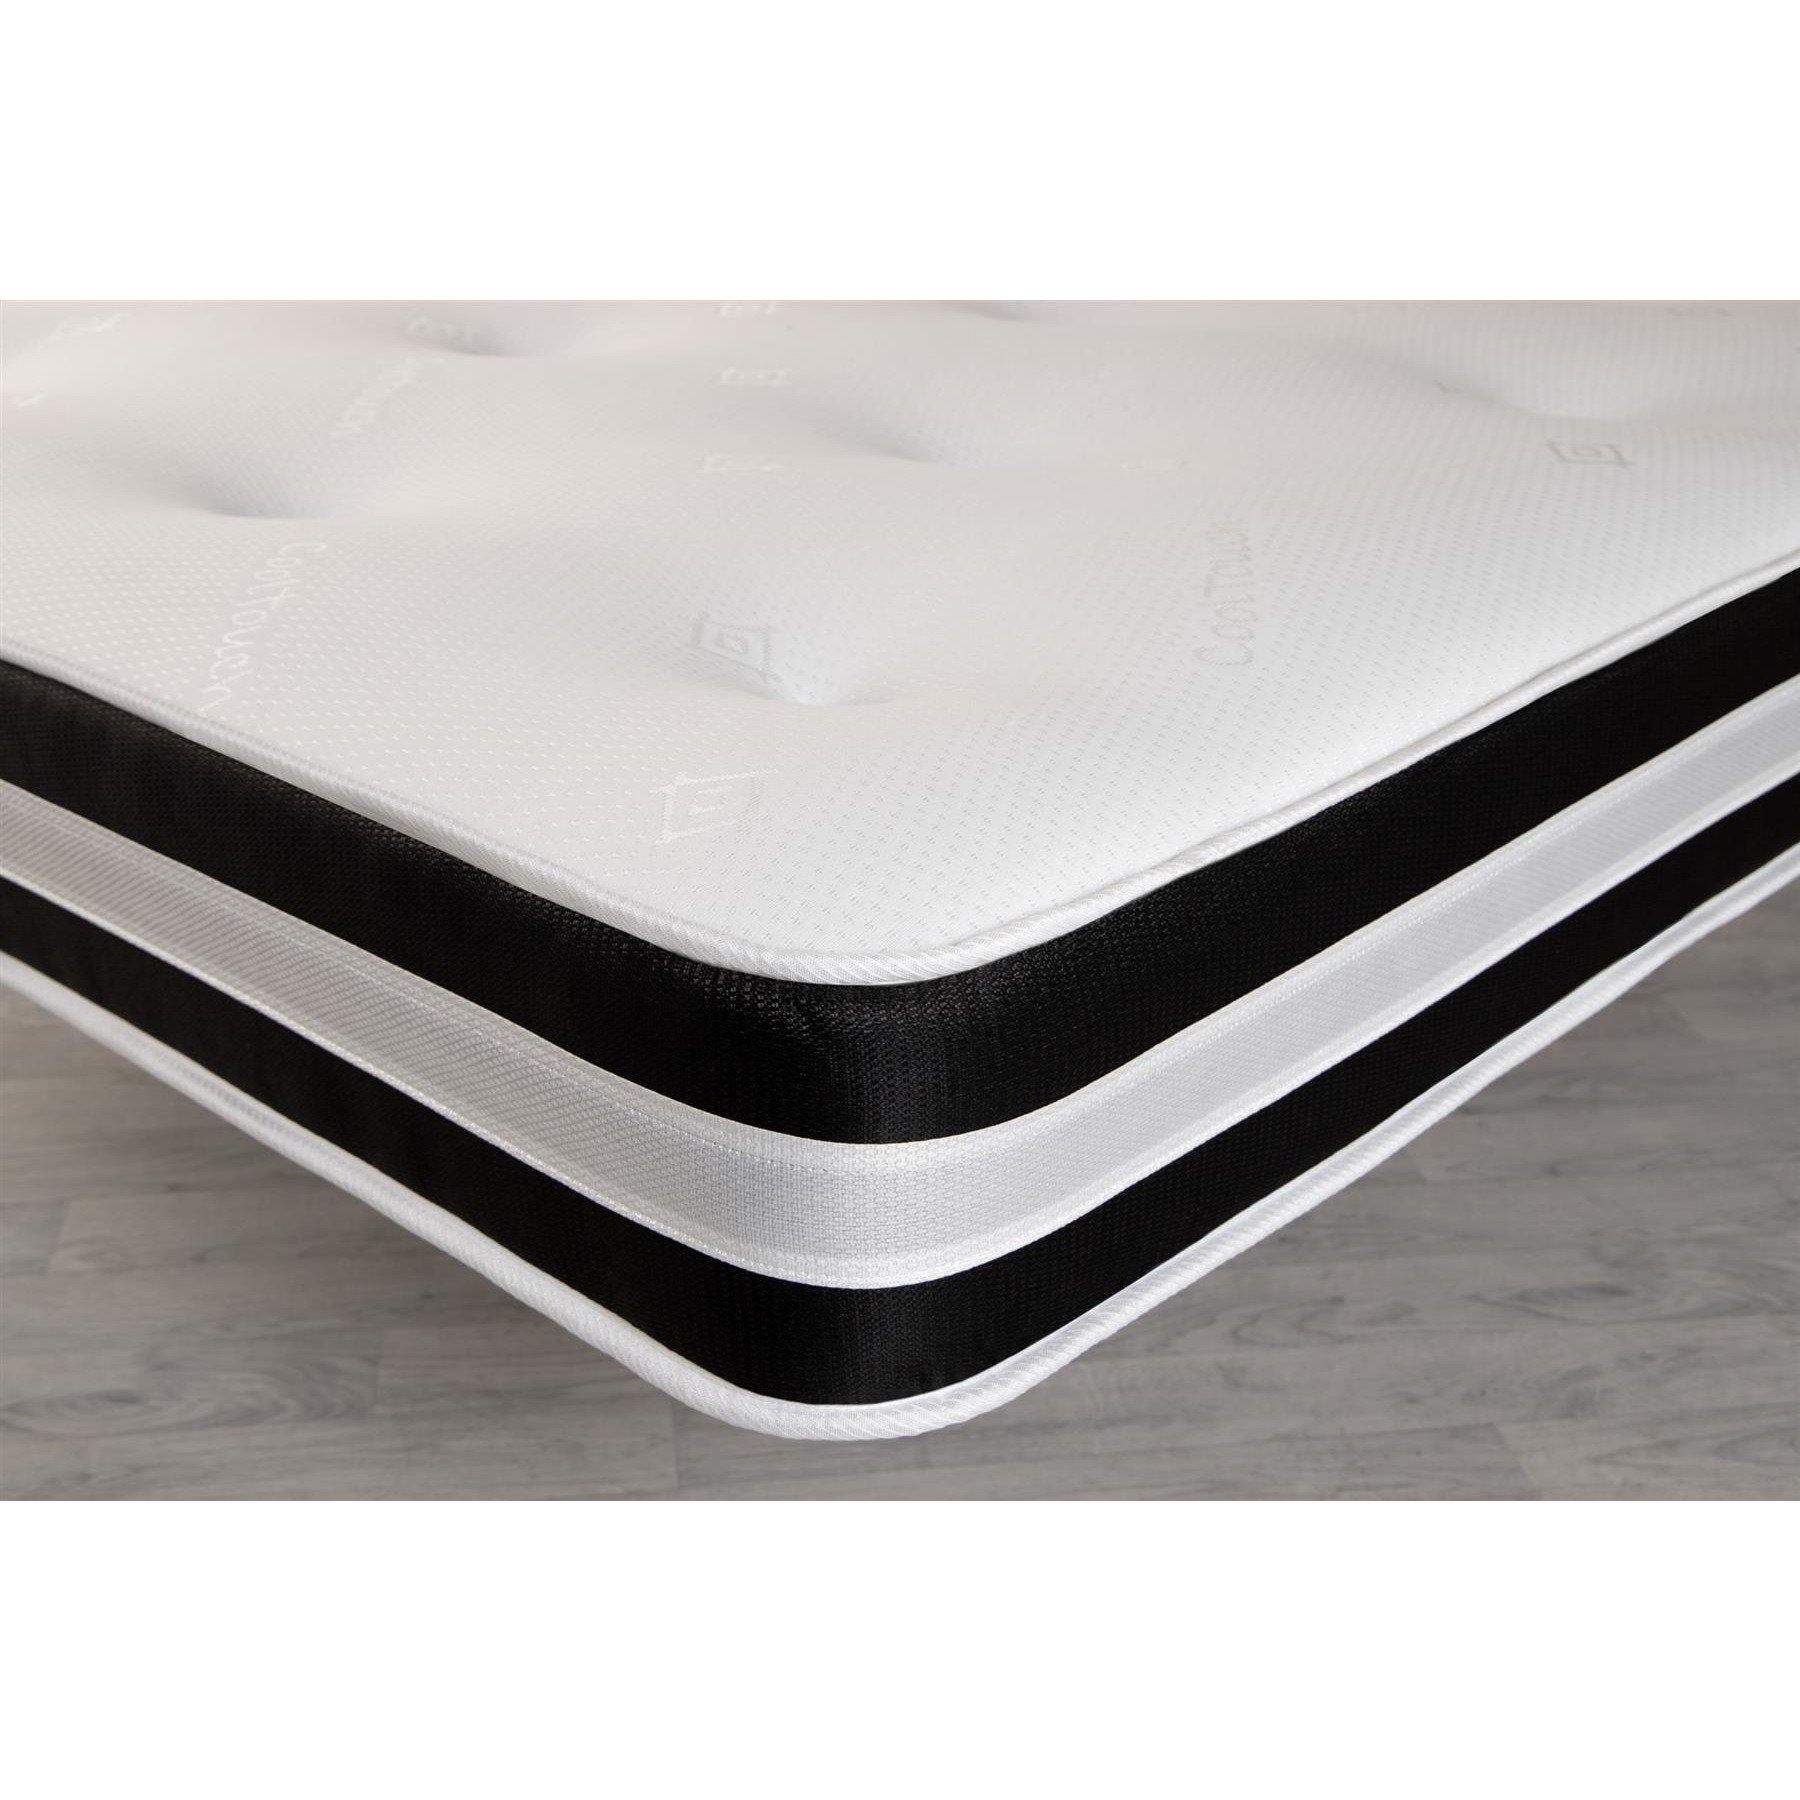 Starlight Beds™ | Deep Spring Mattress With Hand Tufted Finish